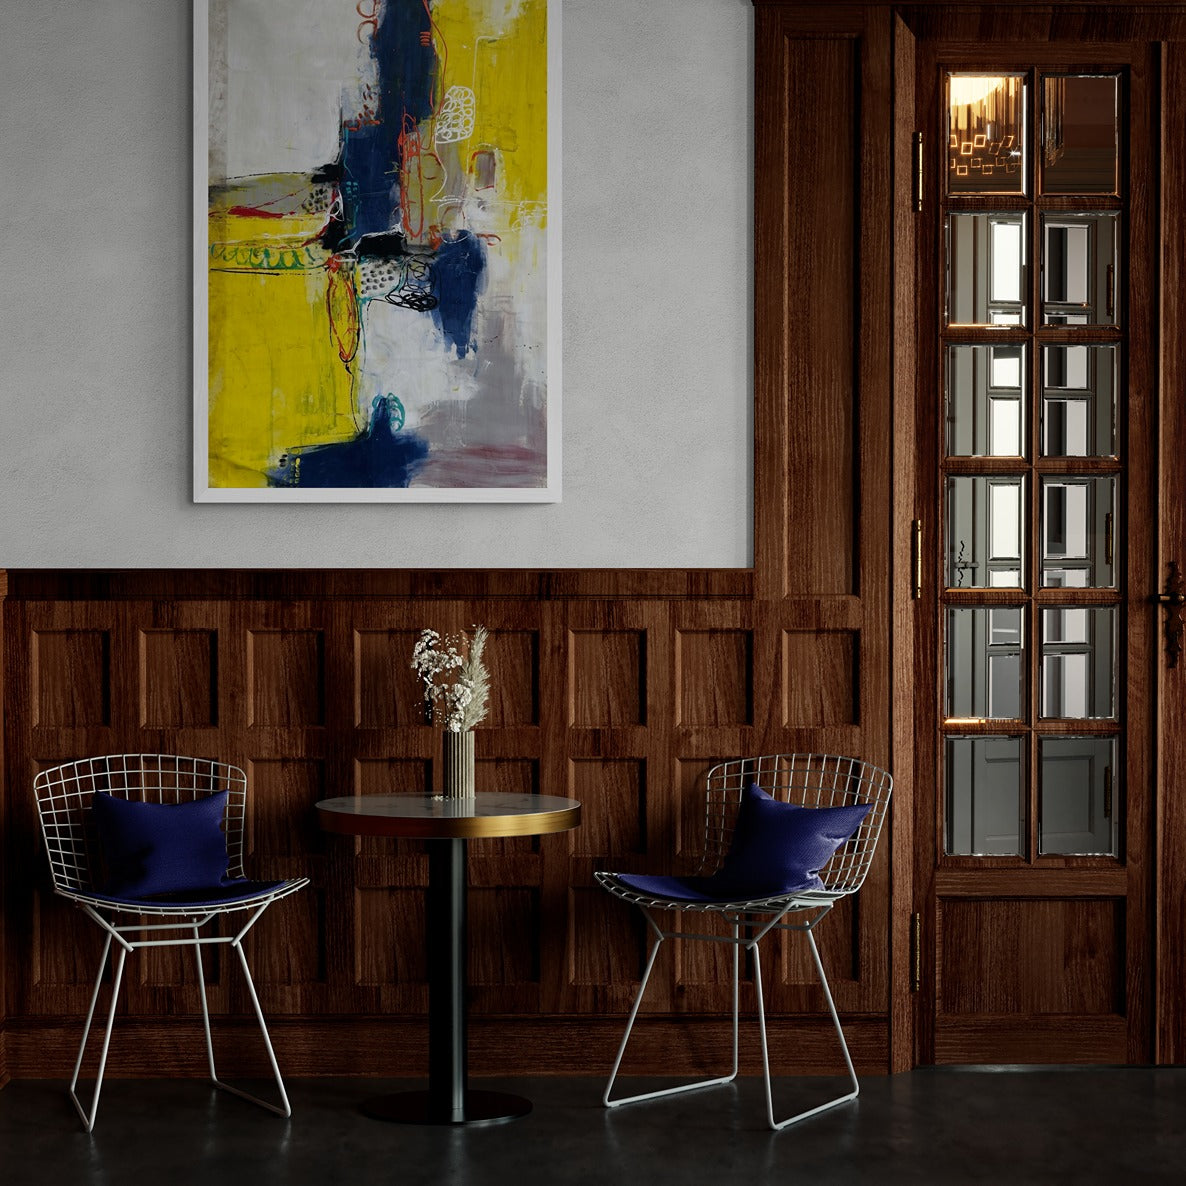 Vibrant hand-painted abstract canvas wall art adorning the walls of a rustic old restaurant with rich oak paneling, adding a contemporary touch to the vintage ambiance.